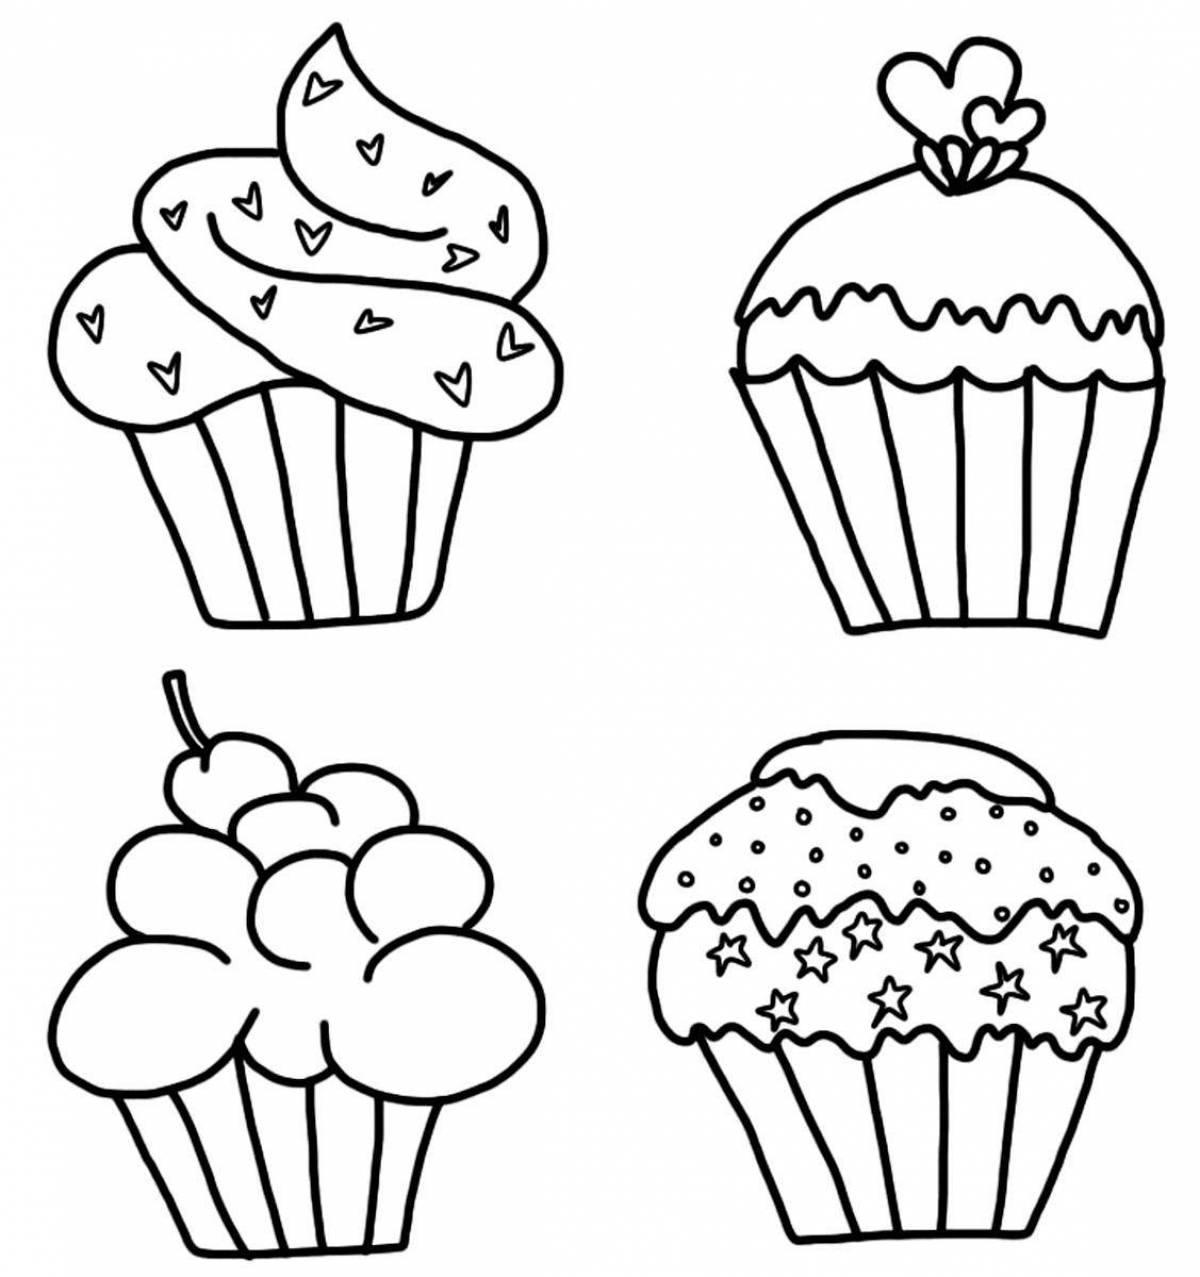 Glowing cake coloring page